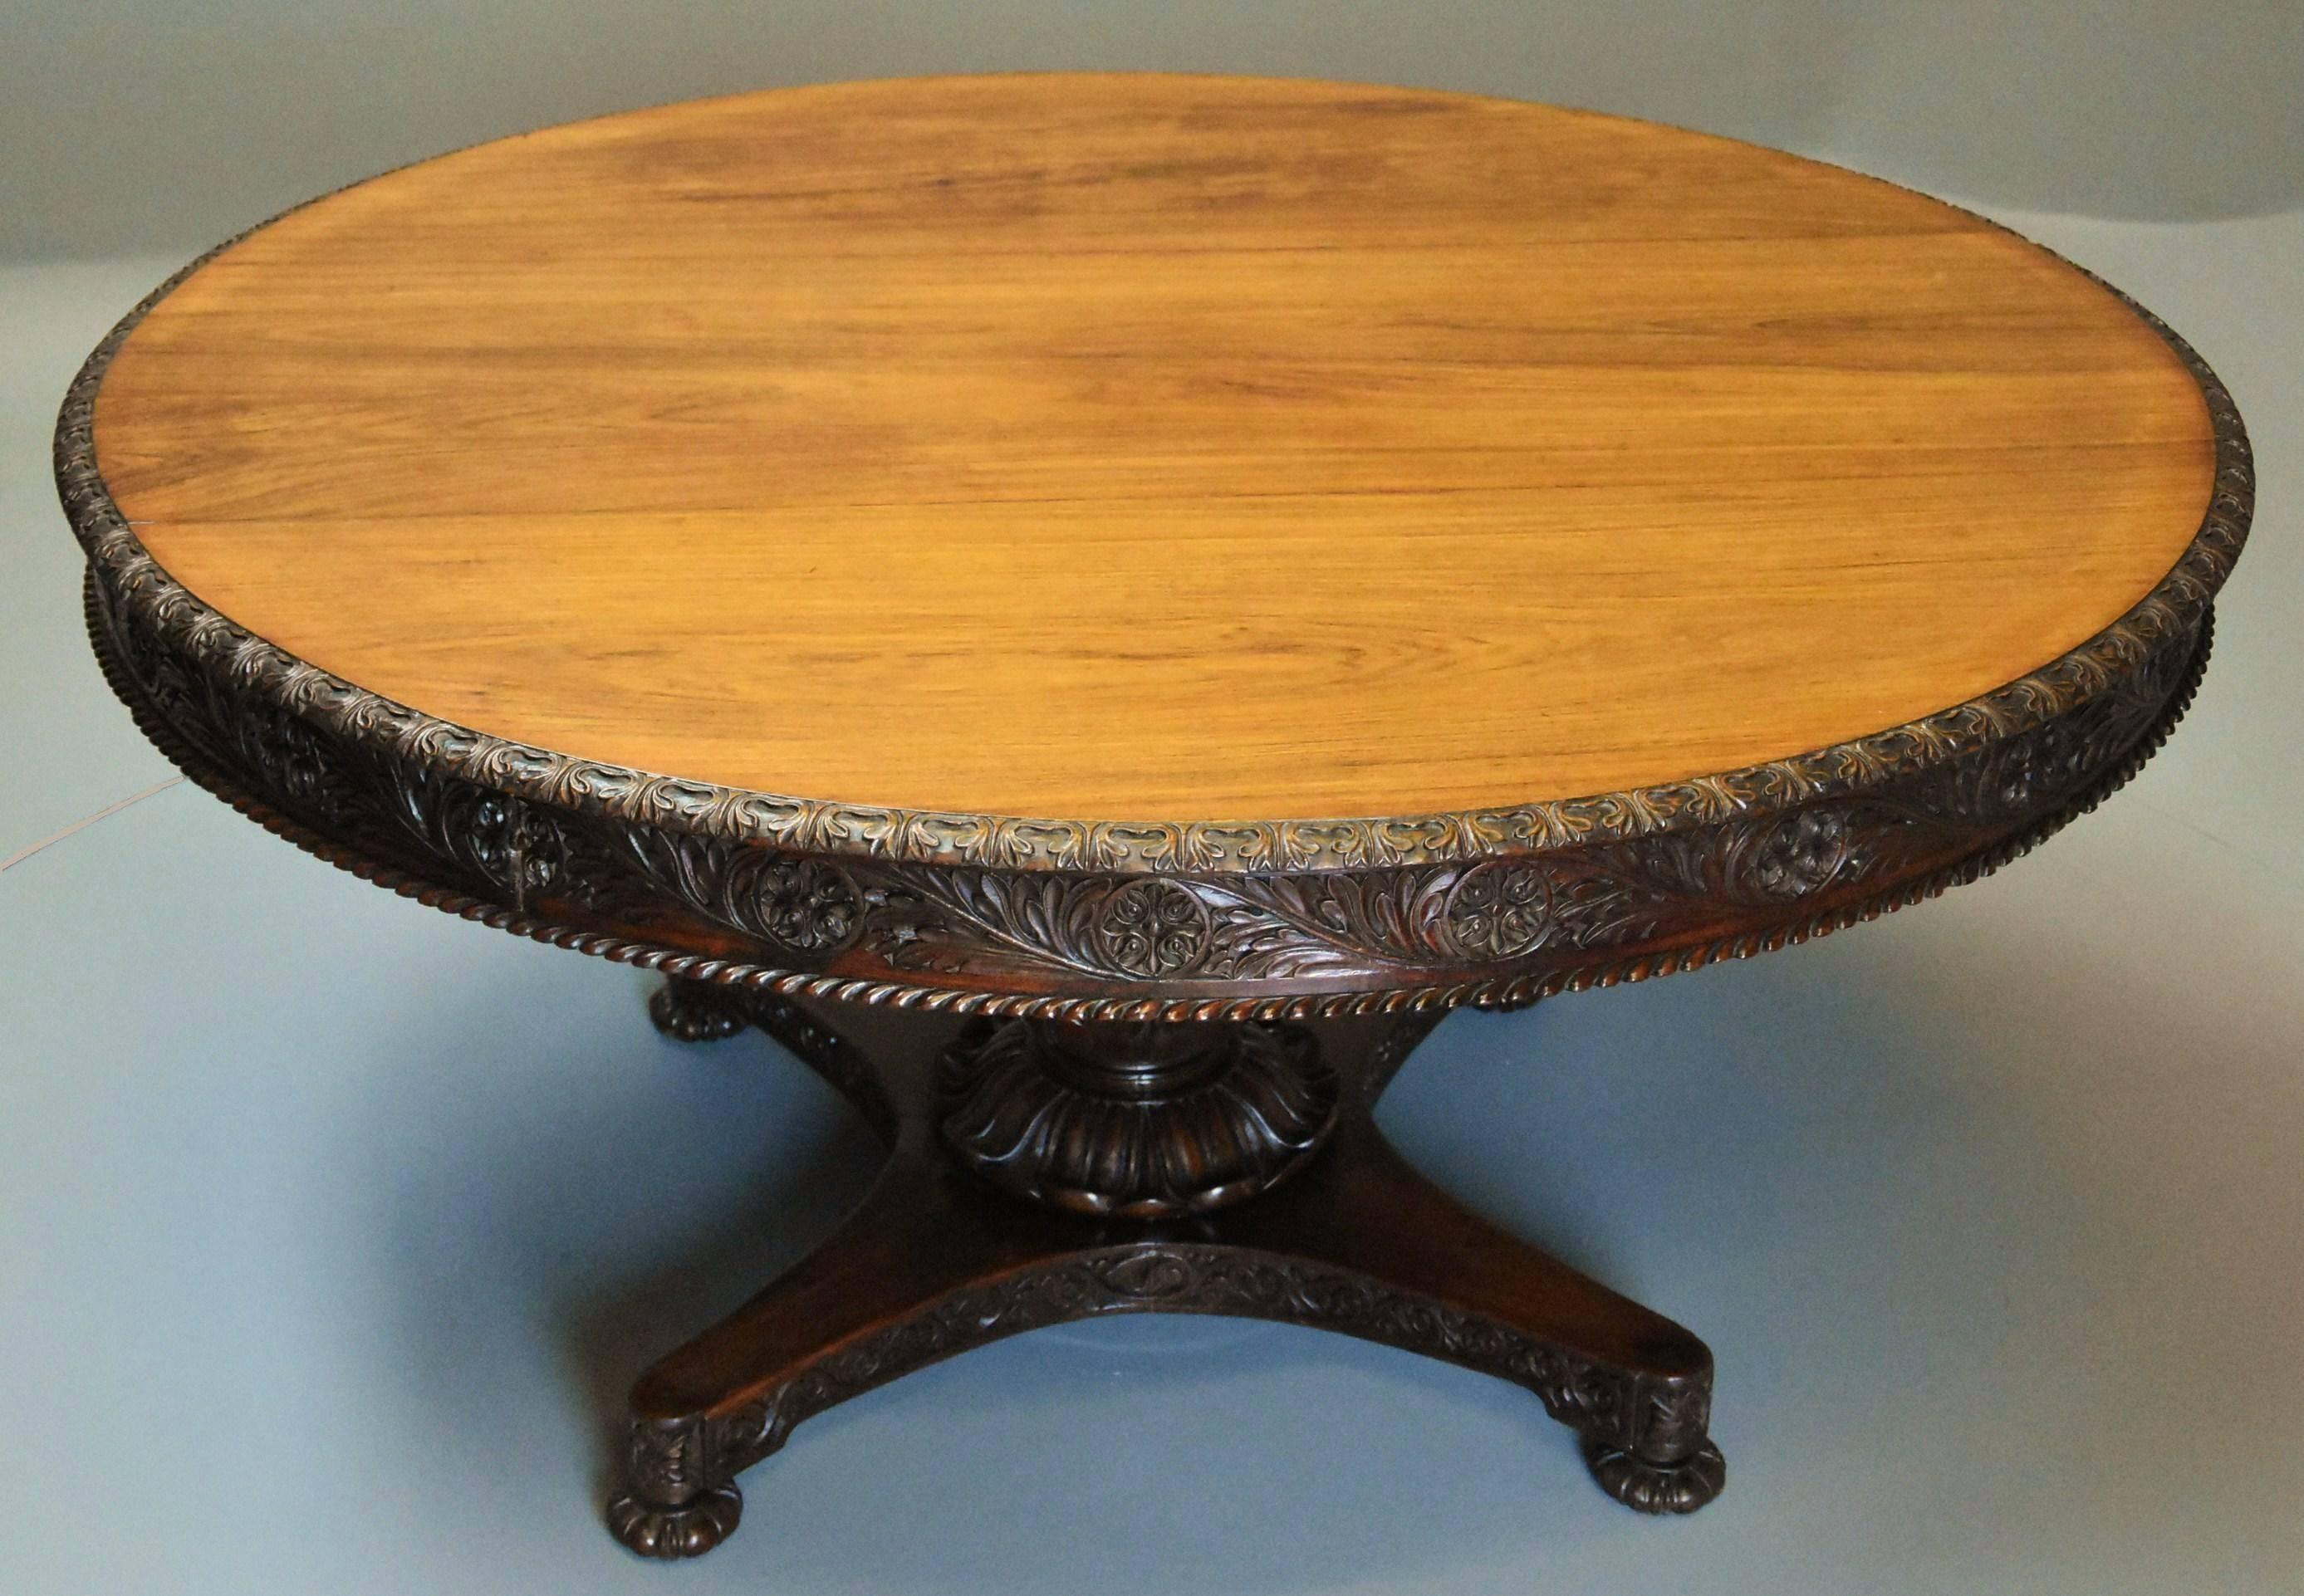 A mid-19th century large Anglo-Indian padouk superbly carved circular centre table.

This table consists of a solid circular padouk top of Fine, faded patina (color) with carved leaf edge leading down to a carved frieze with circular roundels and